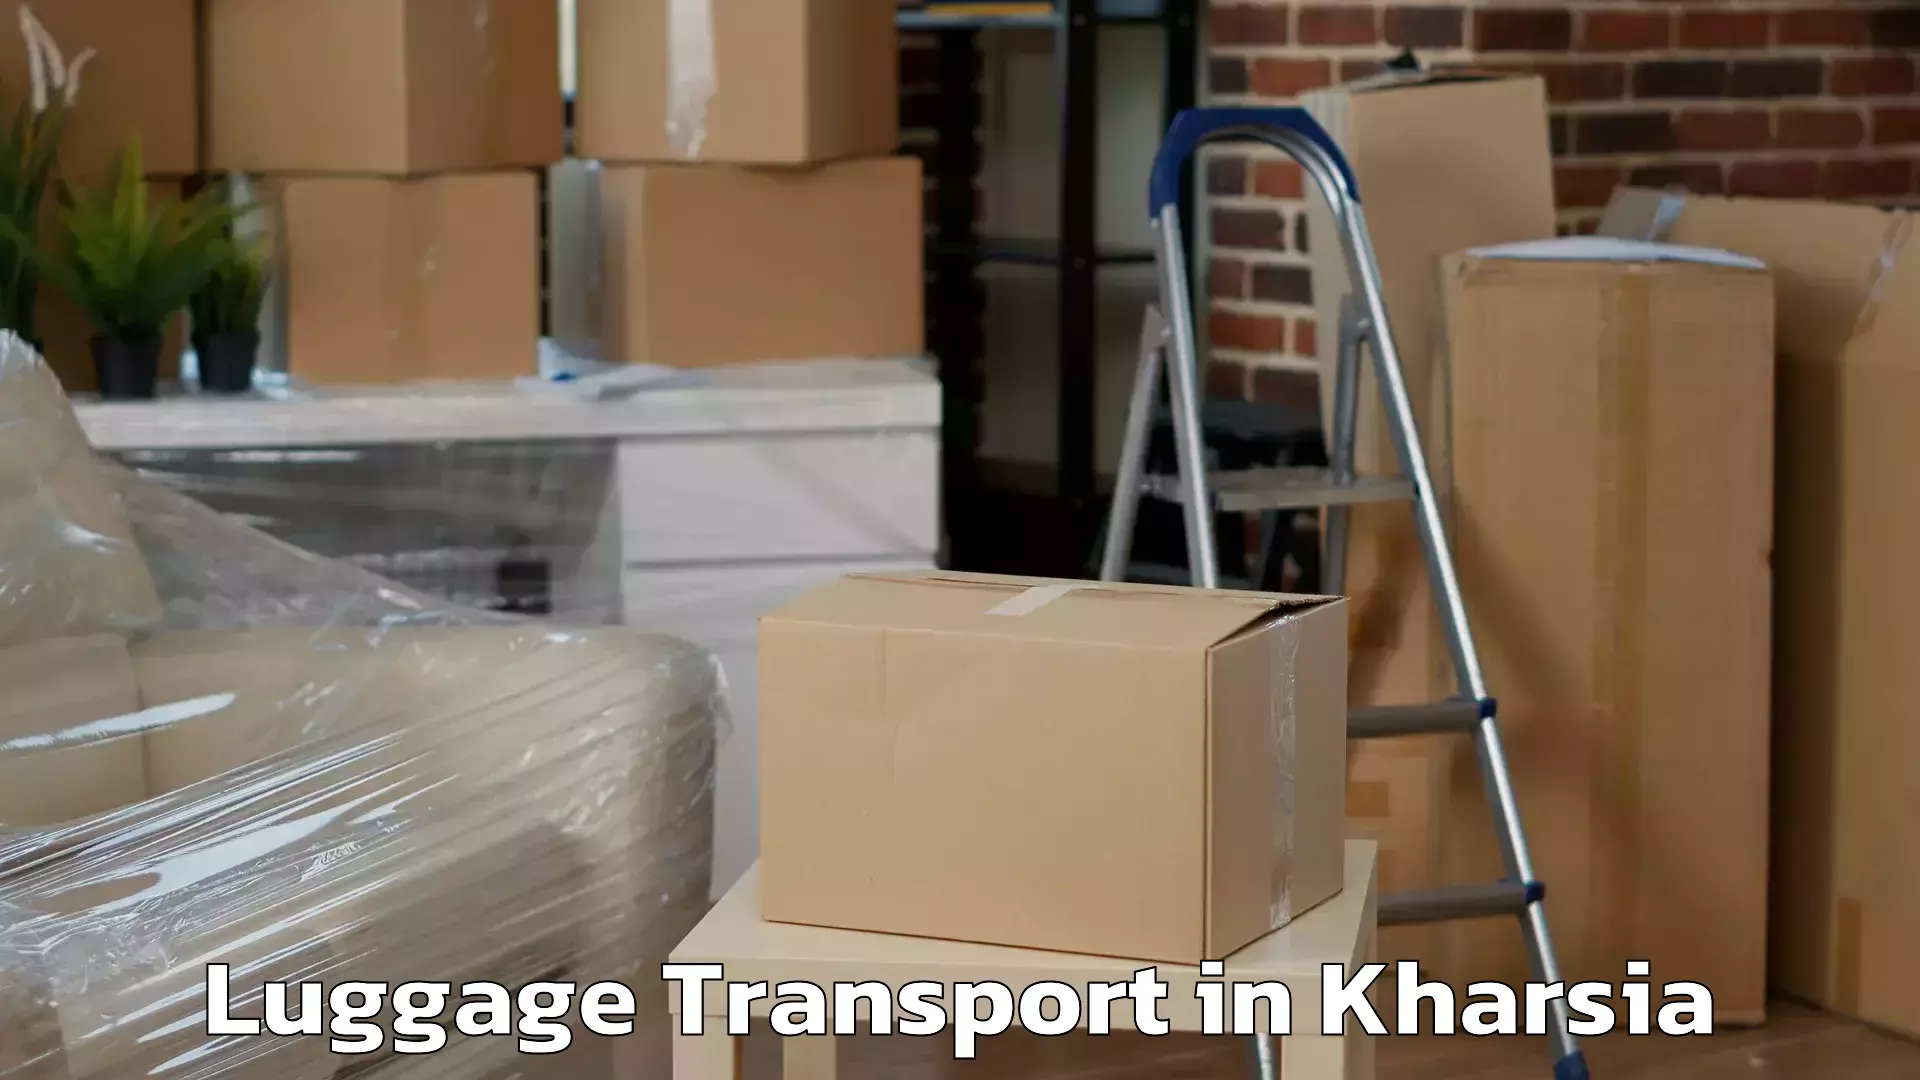 Baggage transport management in Kharsia